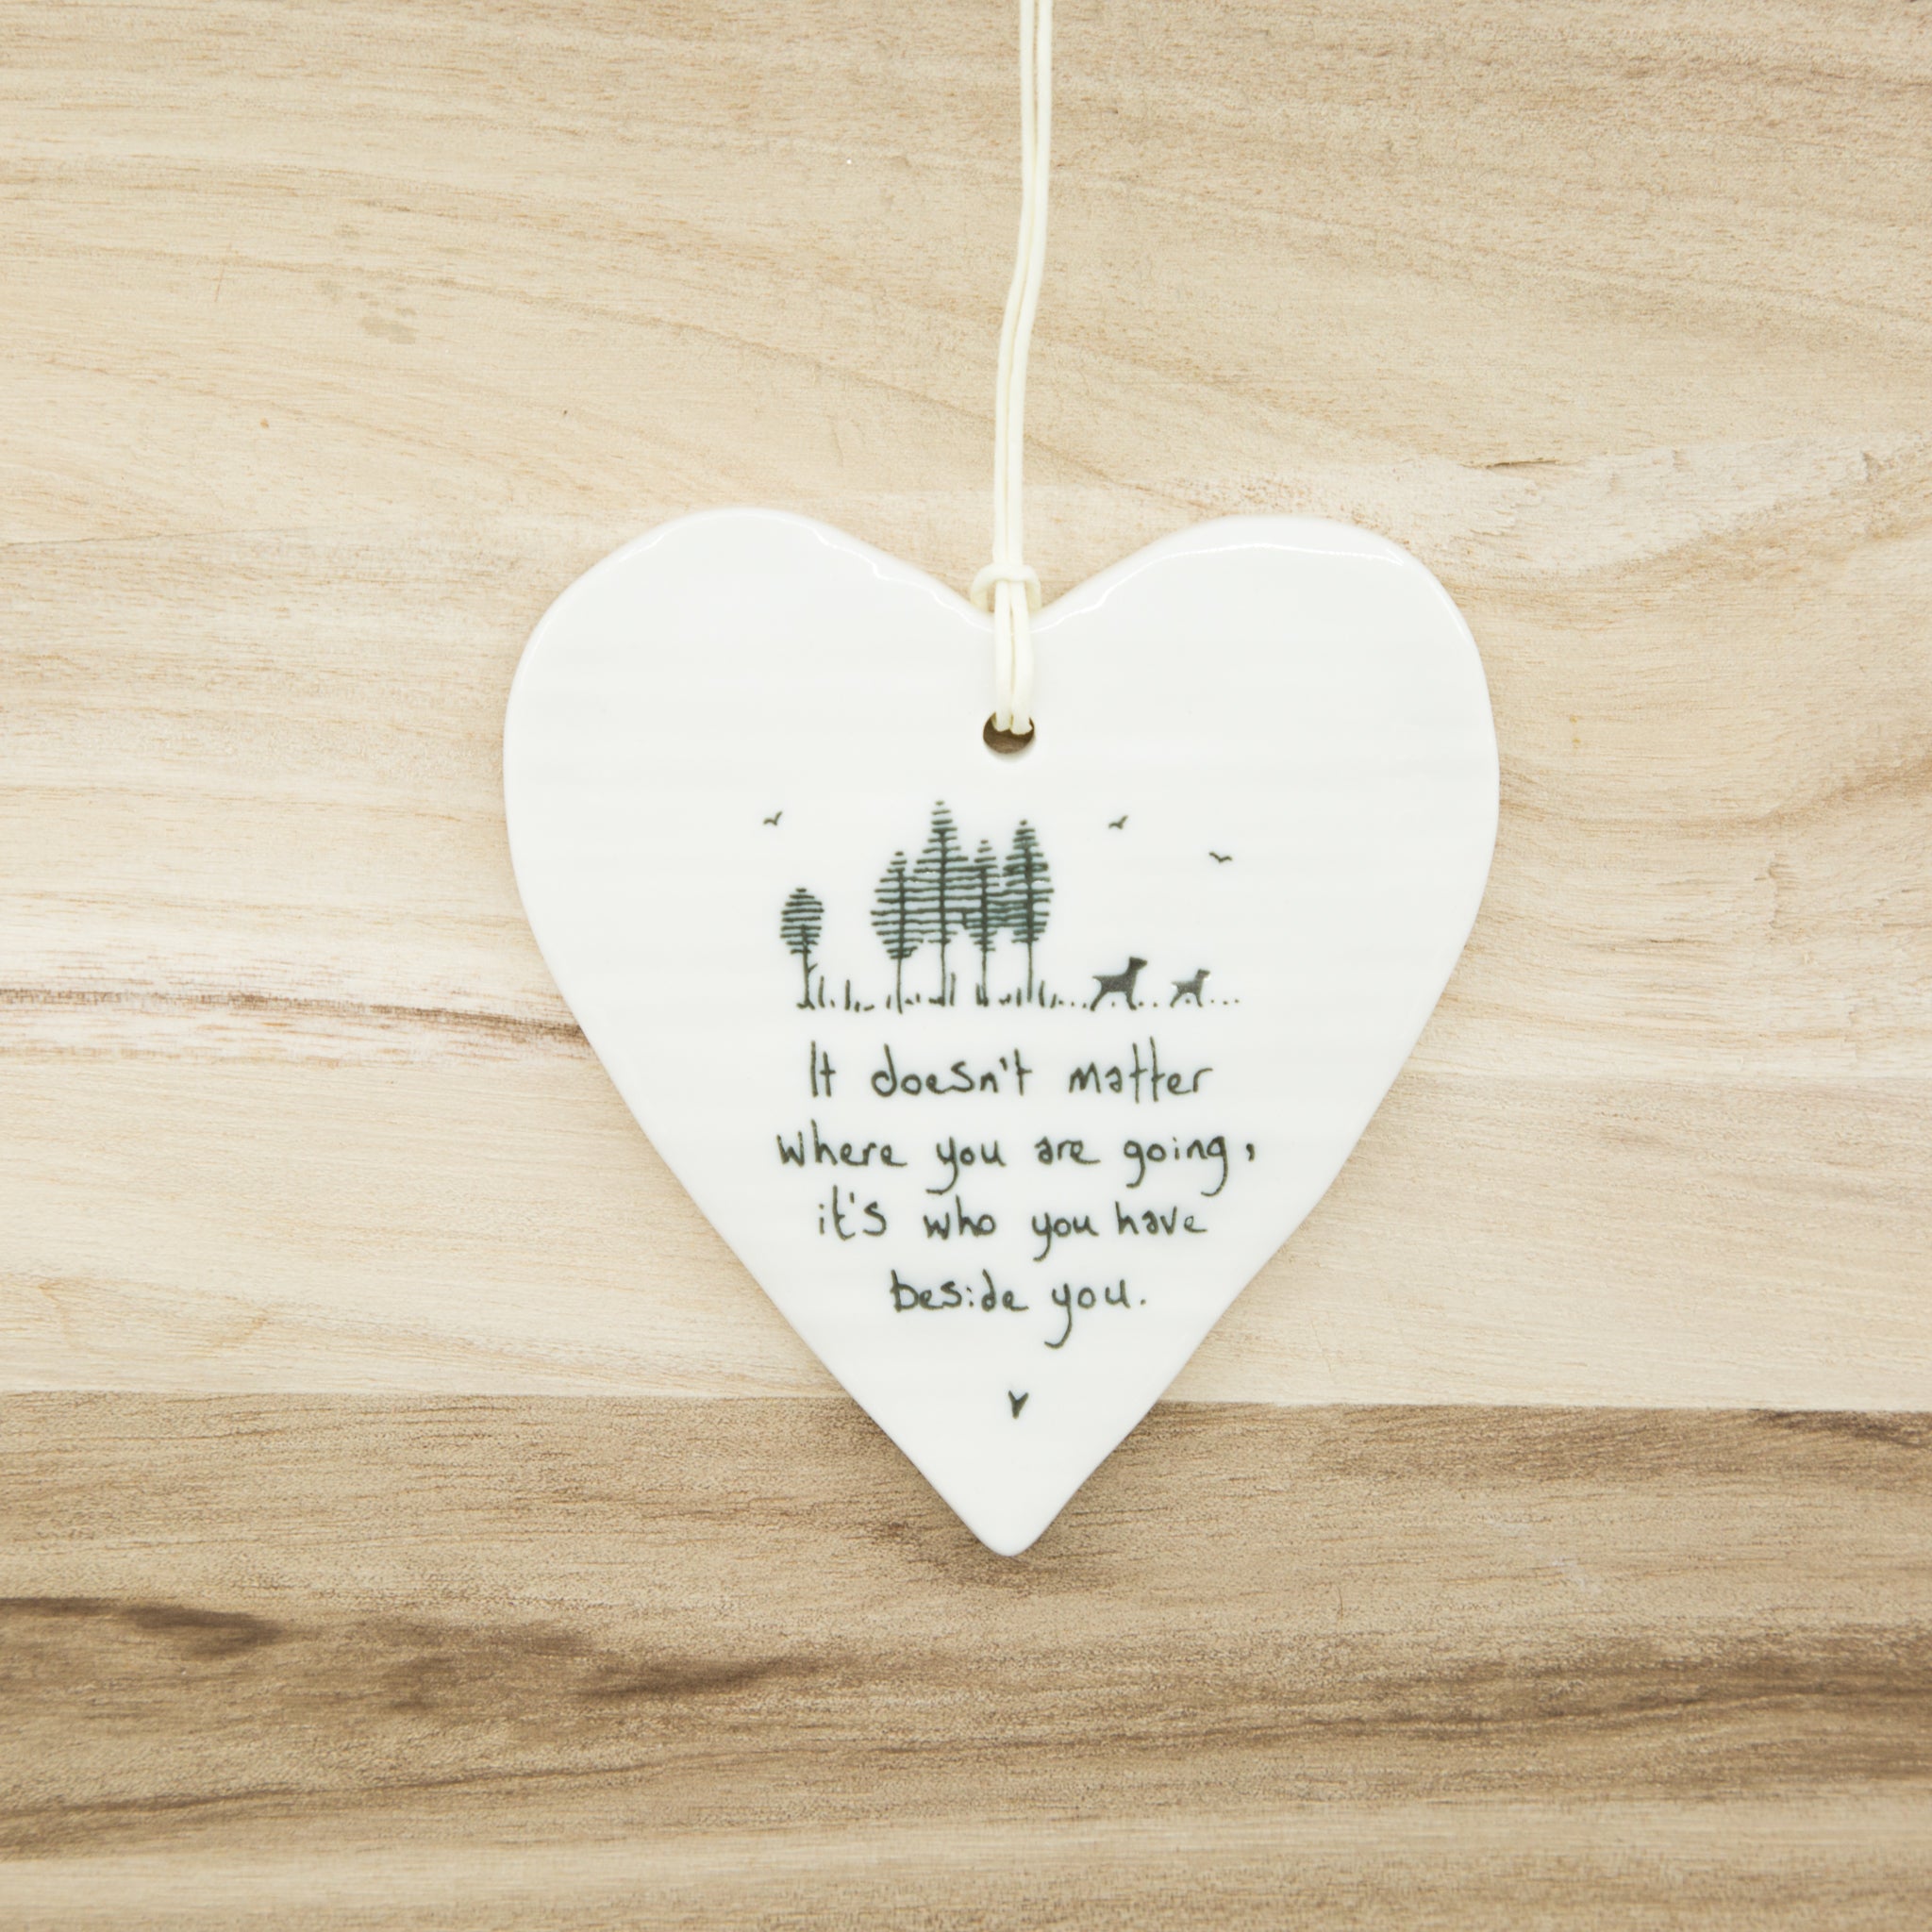 Where you are going -Round Heart Porcelain Hanger